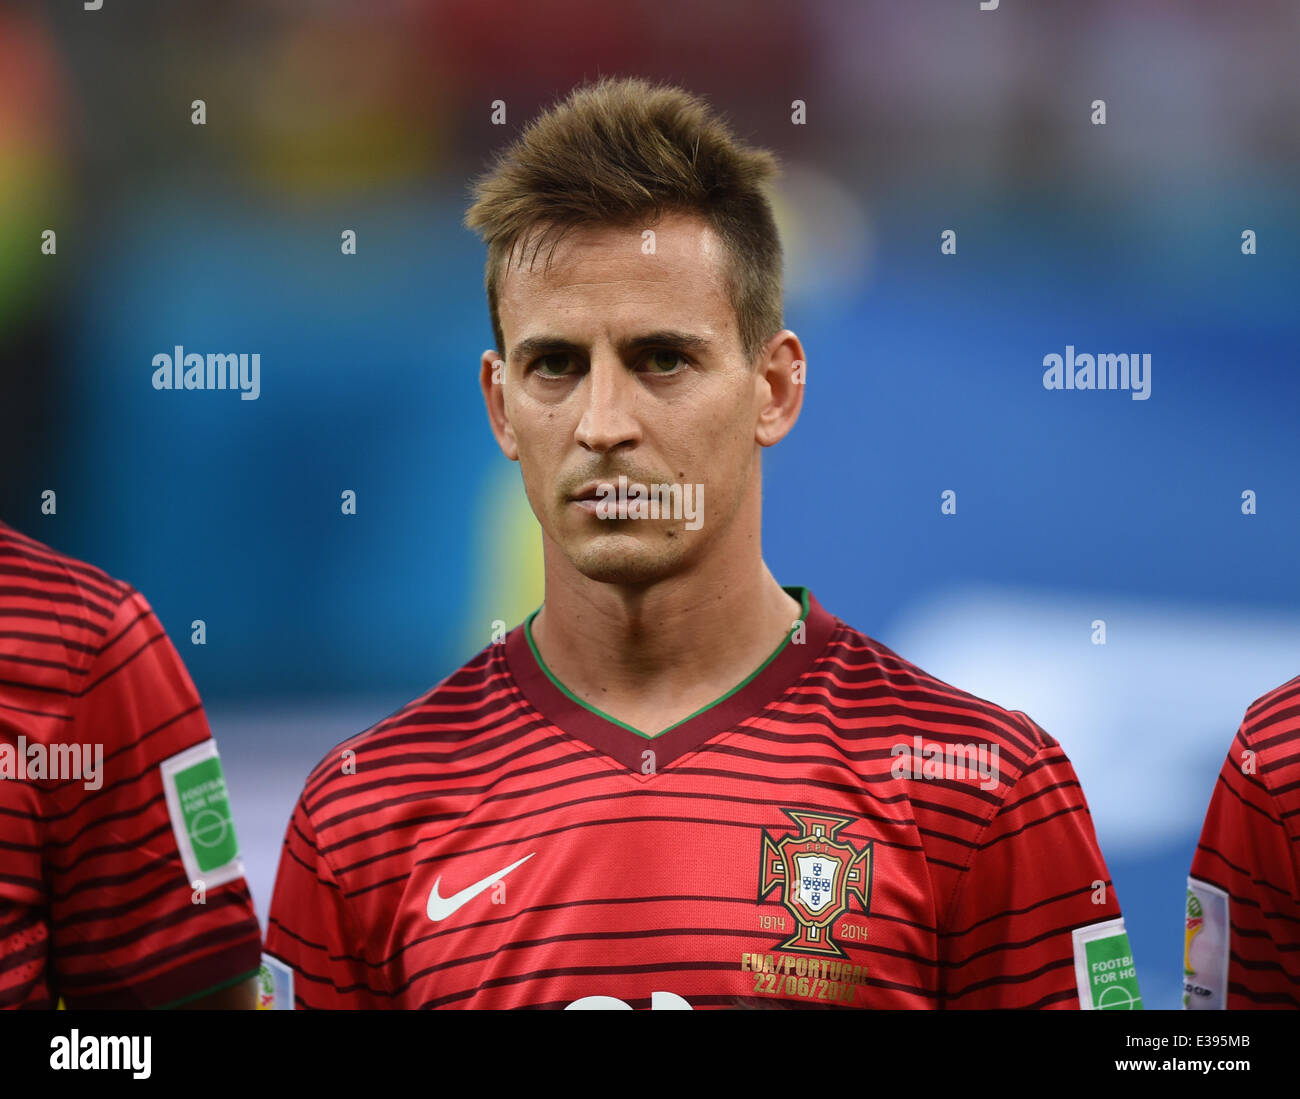 Manaus, Brazil. 22nd June, 2014. Joao Pereira of Portugal seen the national anthem prior to the FIFA World Cup 2014 group G preliminary round match between the USA and Portugal at the Arena Amazonia Stadium in Manaus, Brazil, 22 June 2014. Photo: Marius Becker/dpa/Alamy Live News Stock Photo